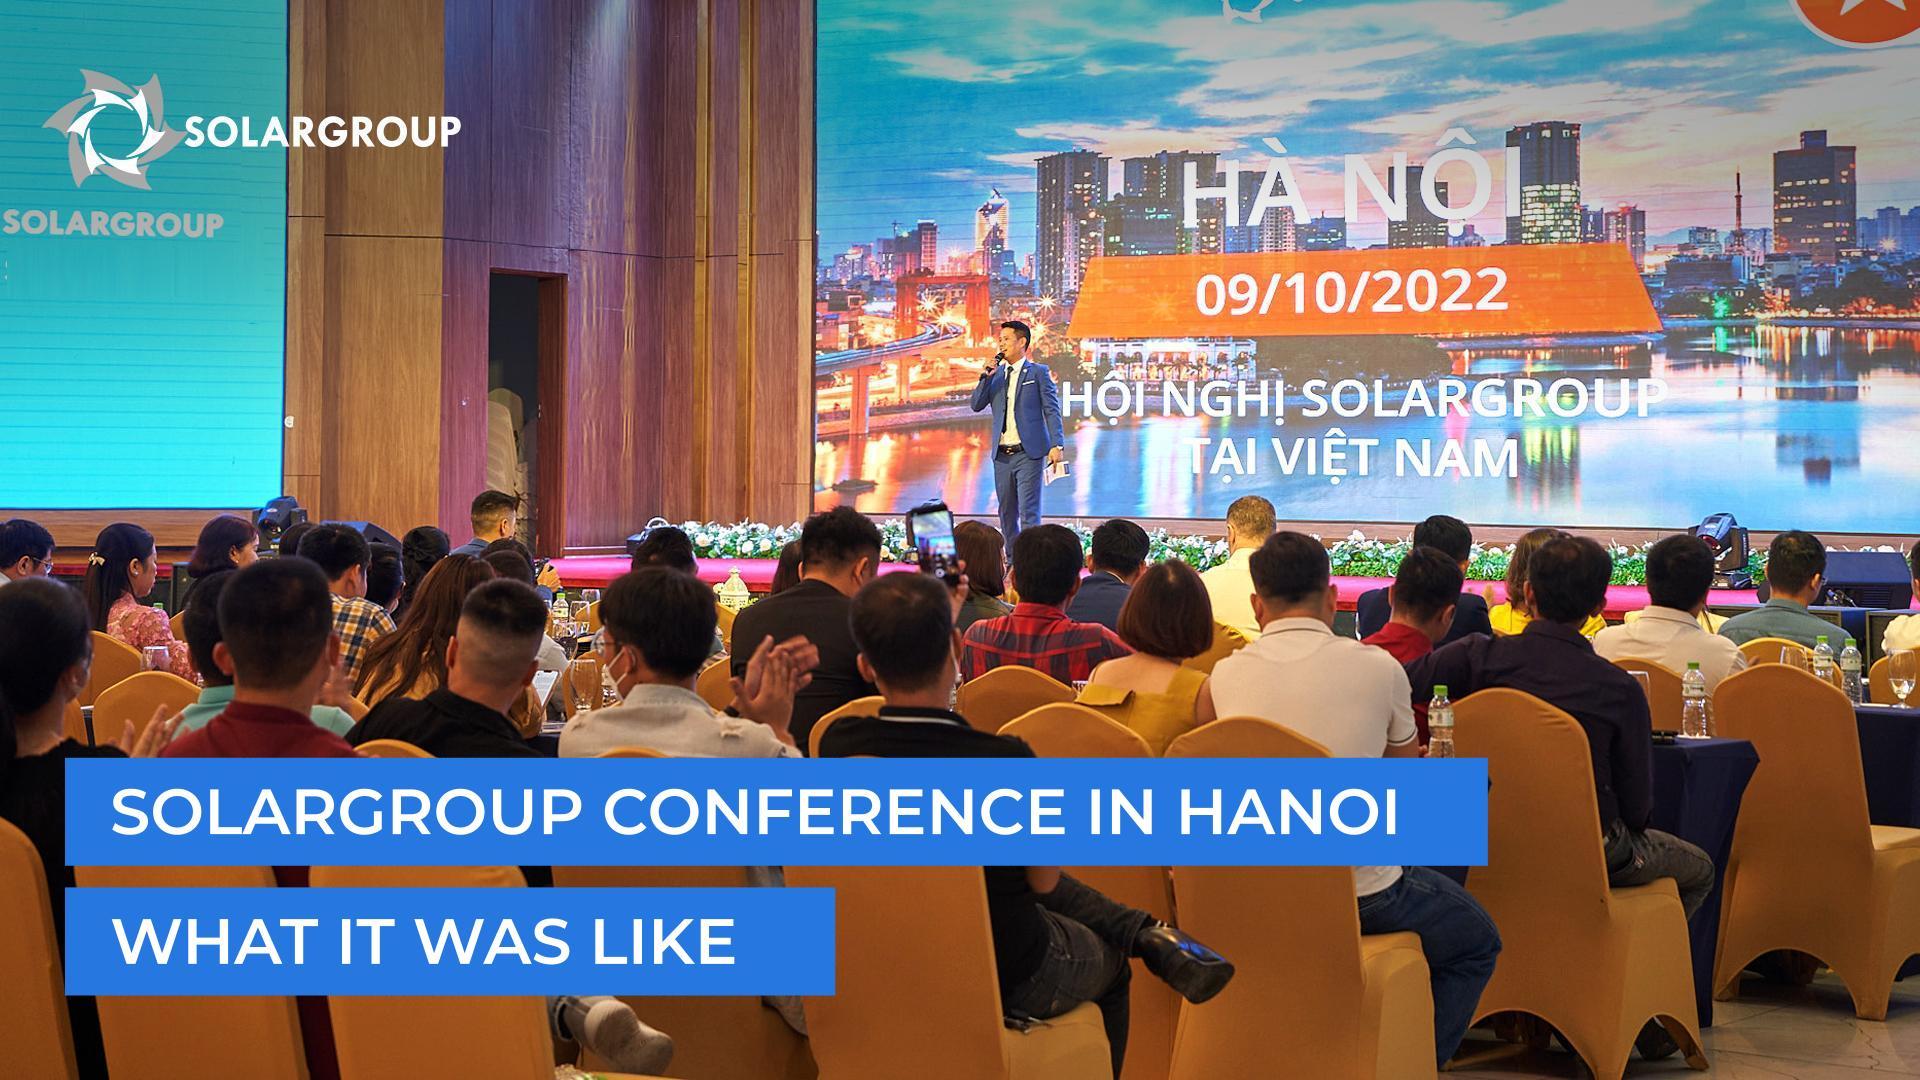 SOLARGROUP Conference in Hanoi: what it was like